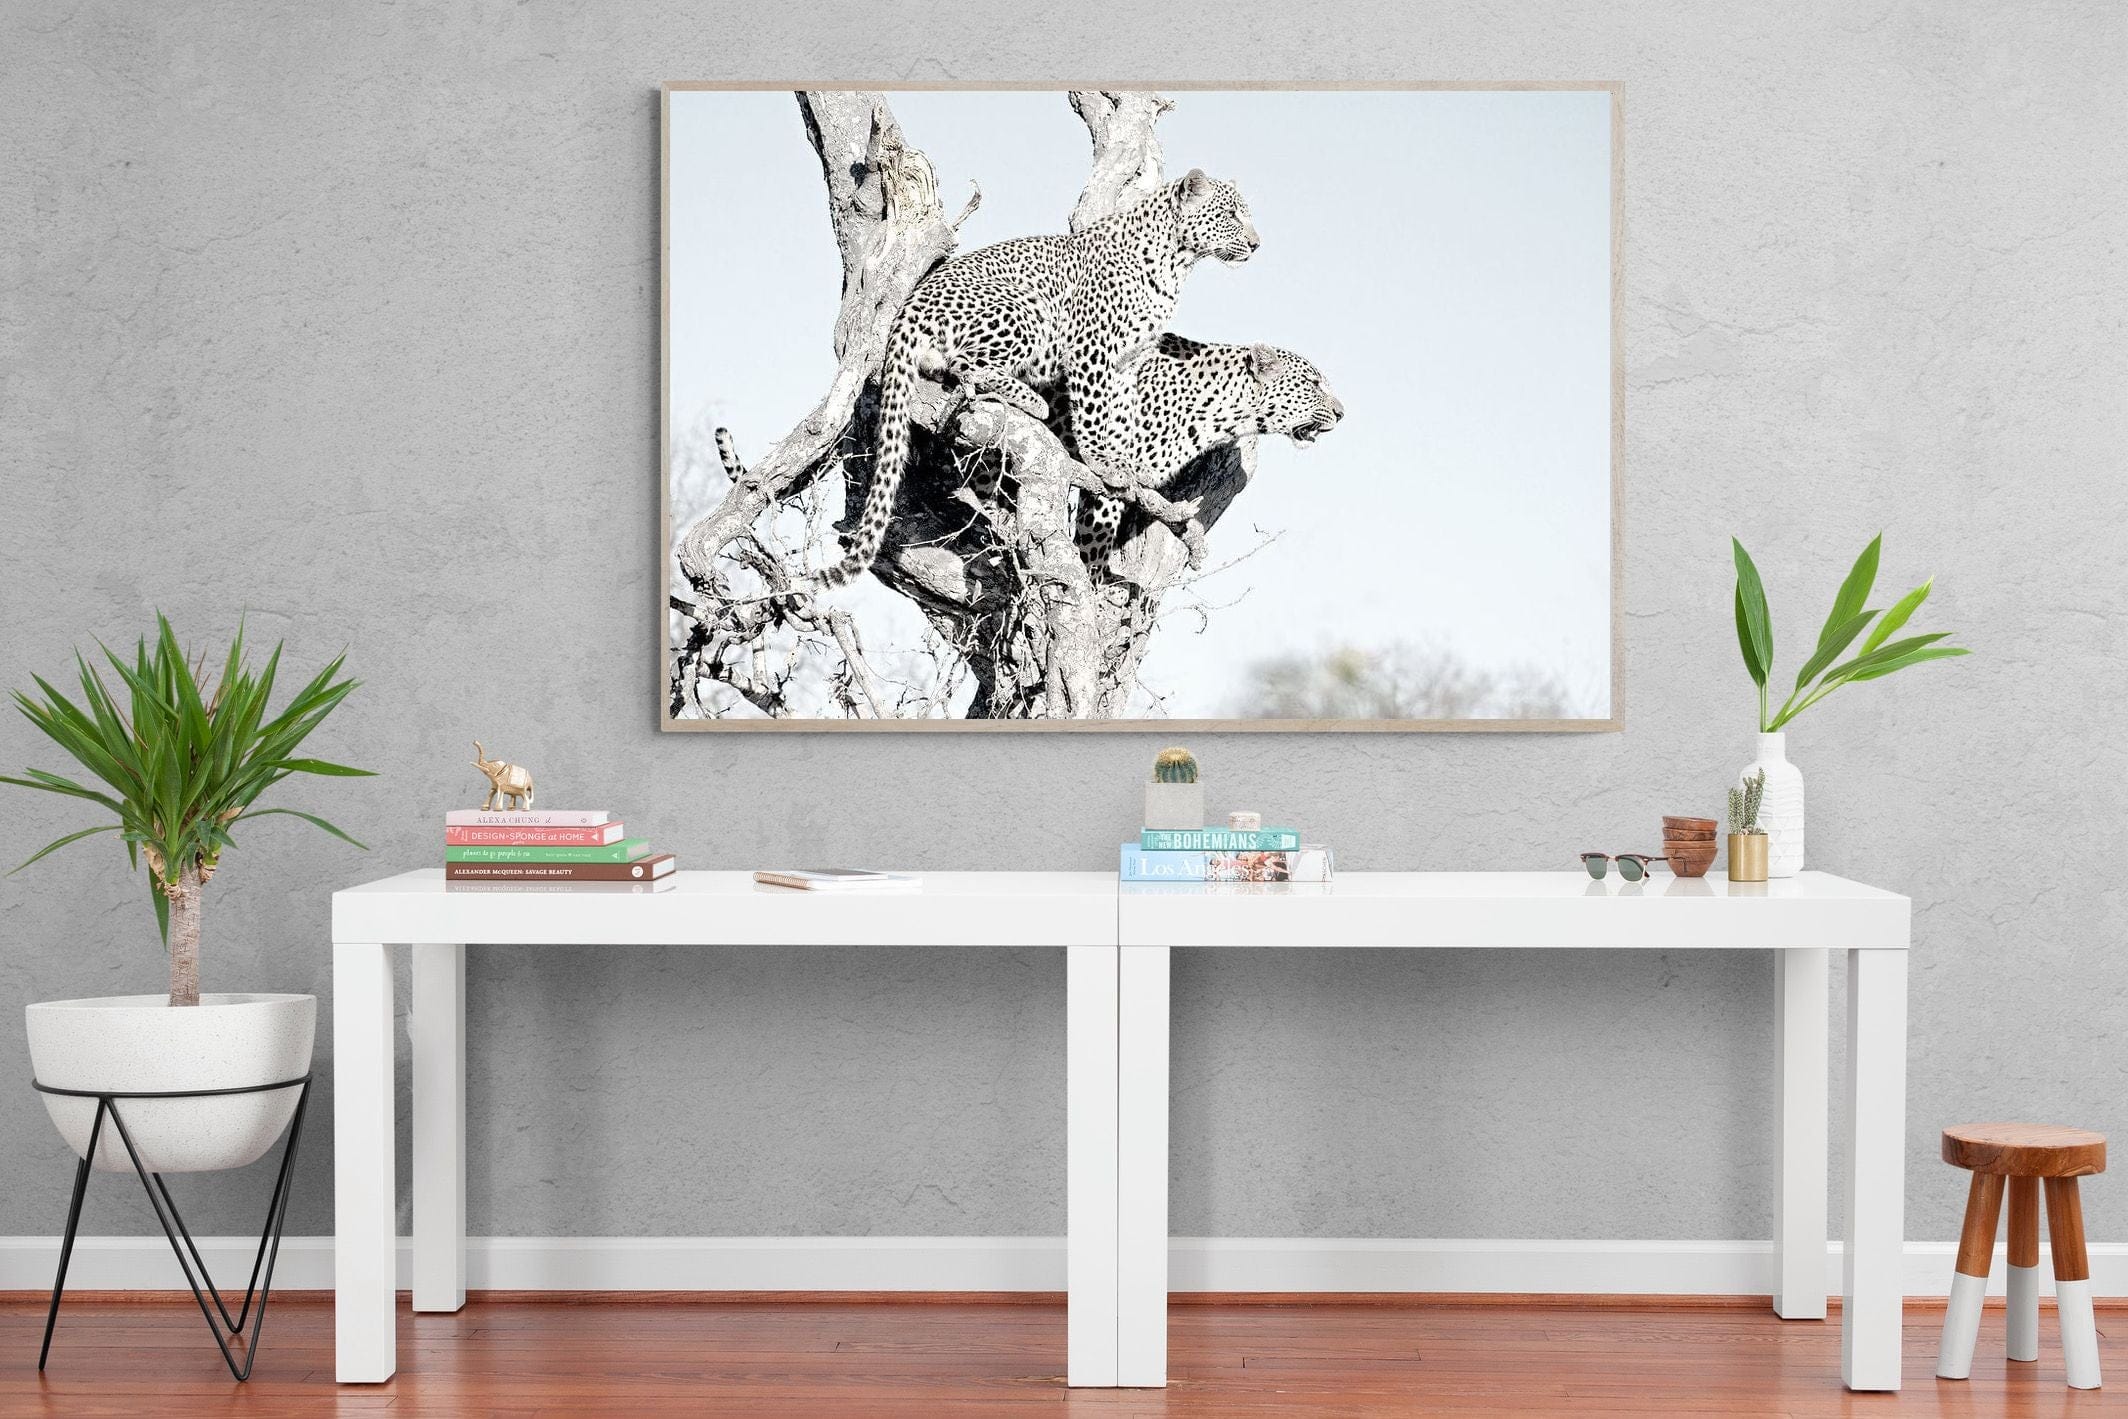 Poised Leopards-Wall_Art-150 x 100cm-Mounted Canvas-Wood-Pixalot